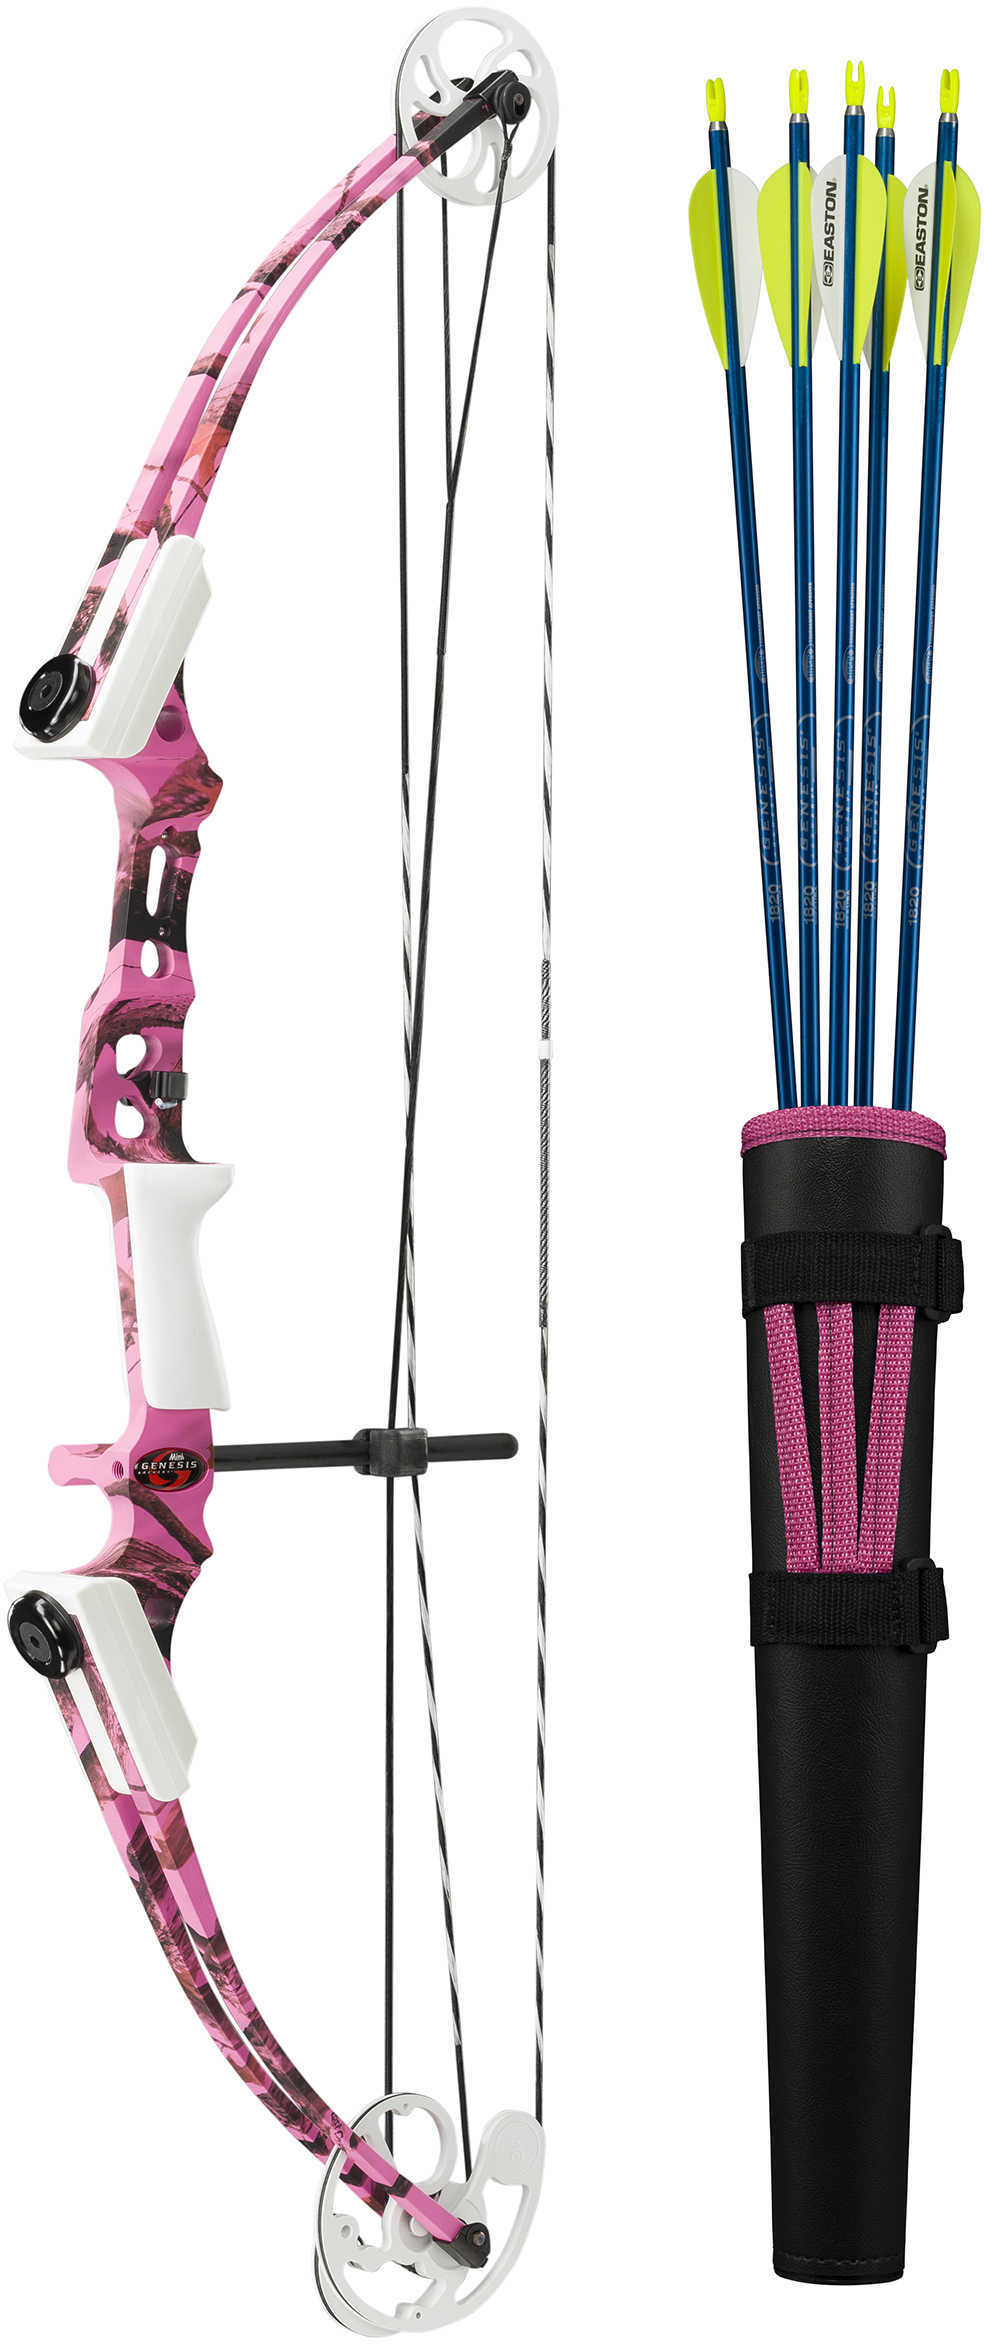 Genesis Mini Bow with Kit Right Handed, Pink Camo Md: 12270